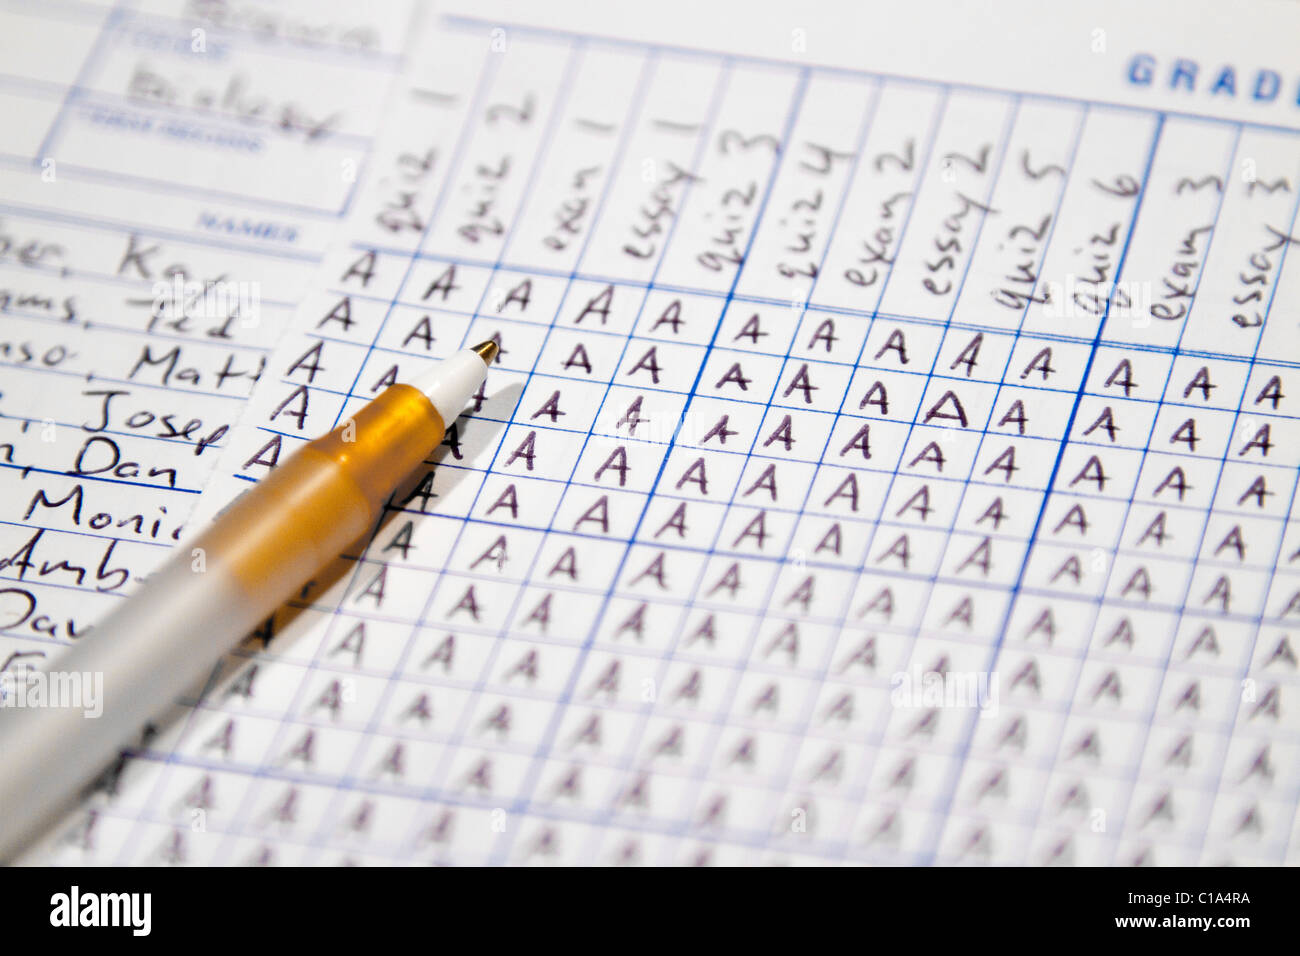 A teacher's grade book with student scores showing all A's Stock Photo -  Alamy